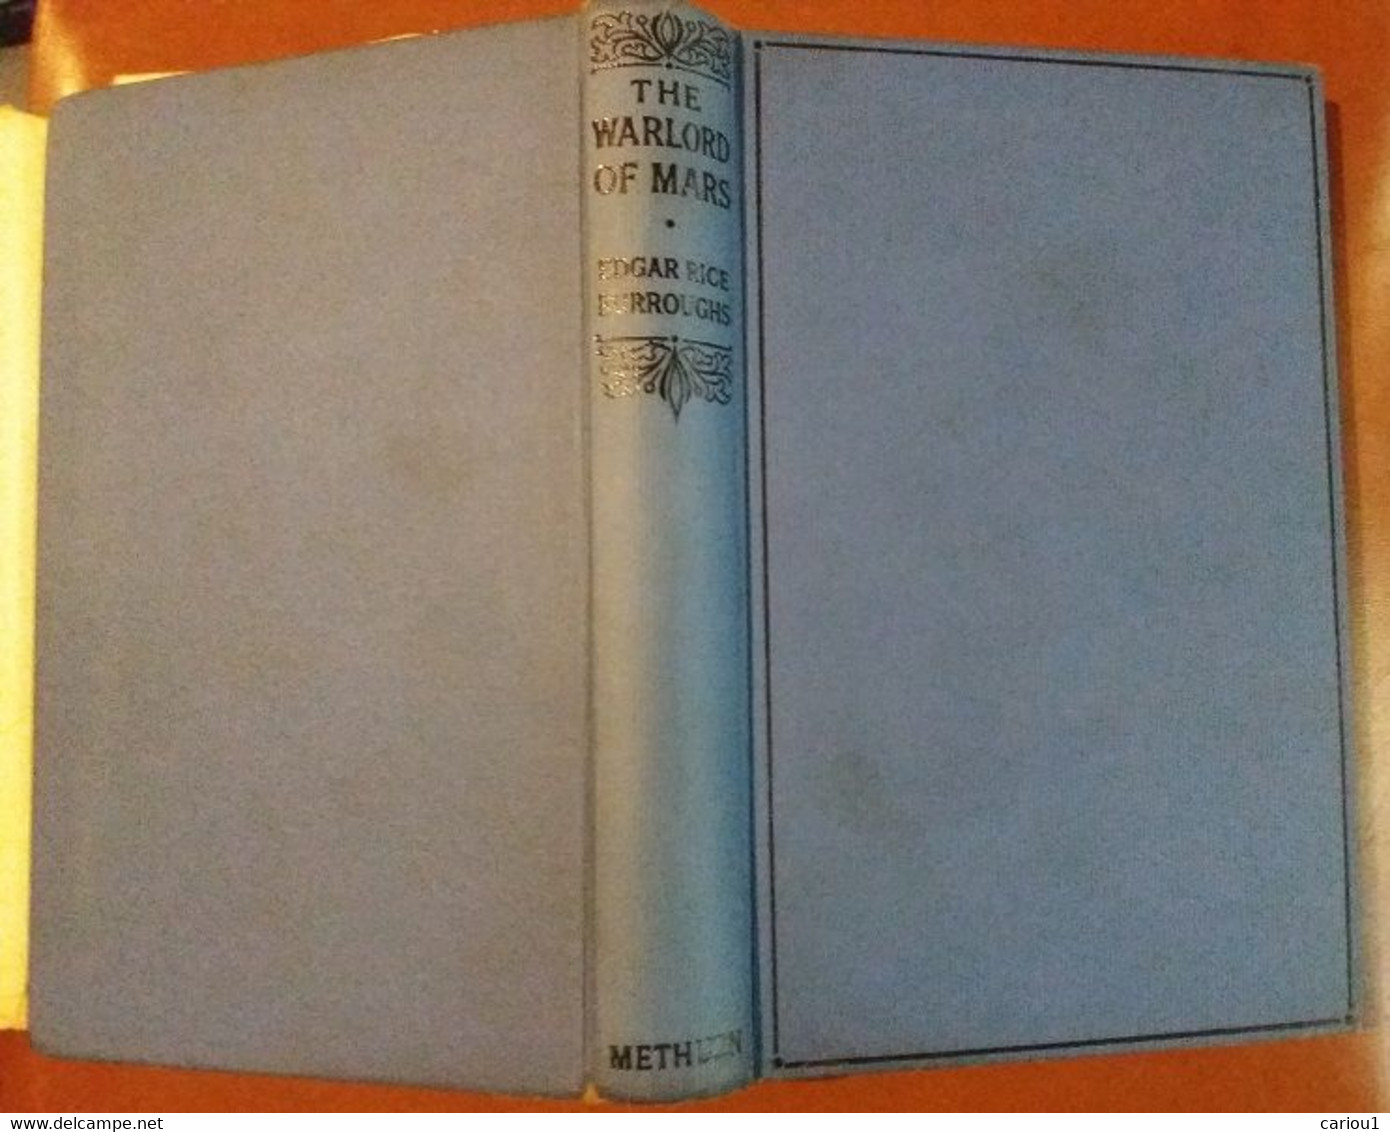 C1 Edgar Rice Burroughs THE WARLORD OF MARS Methuen 1935 JAQUETTE Dust Jacket PORT INCLUS France - Science Fiction